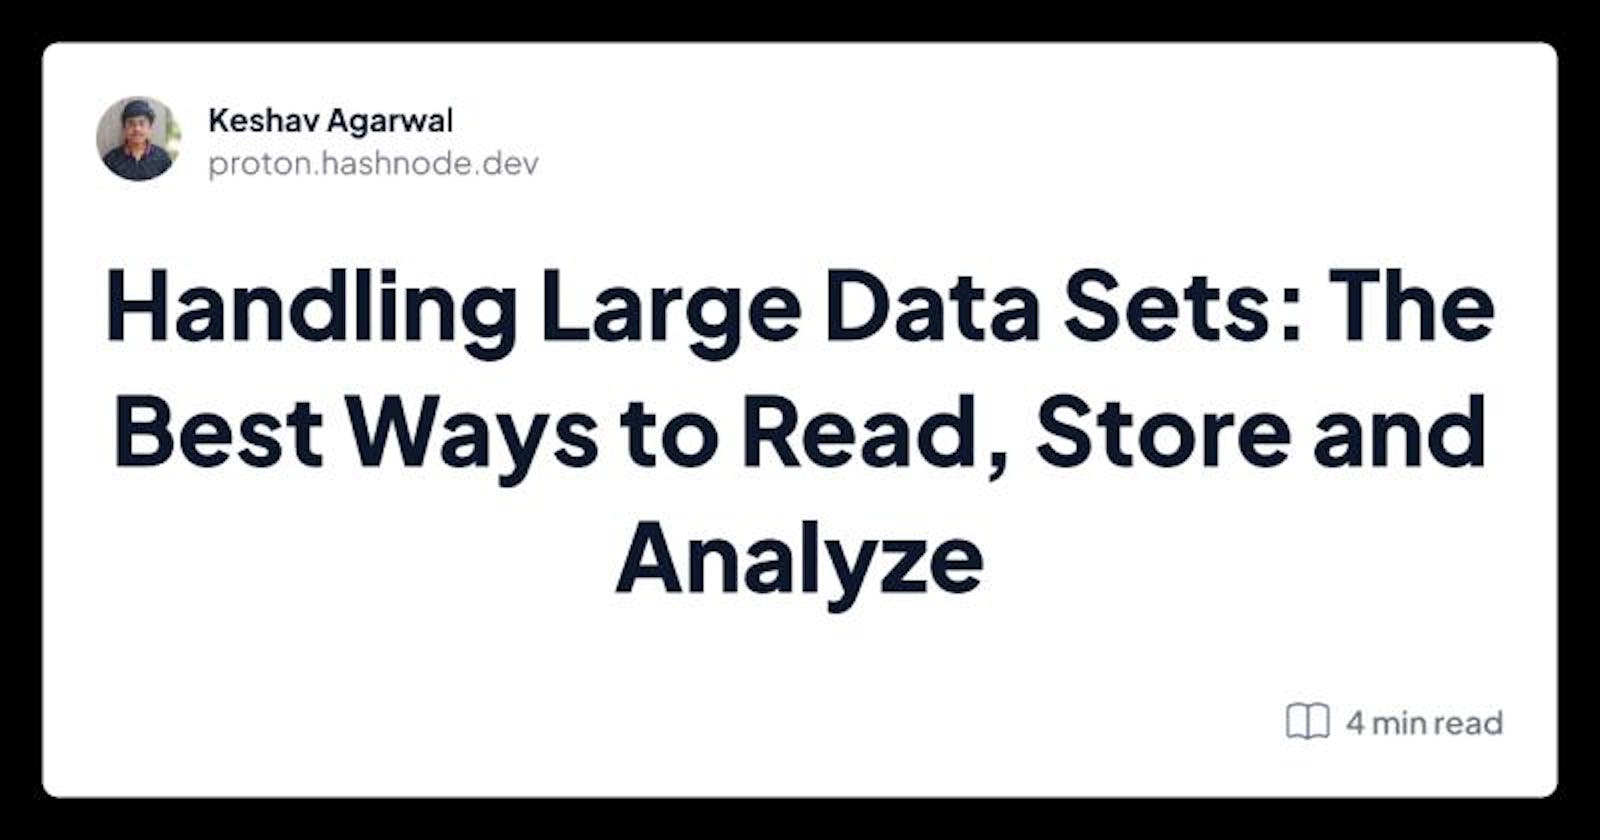 Handling Large Data Sets: The Best Ways to Read, Store and Analyze